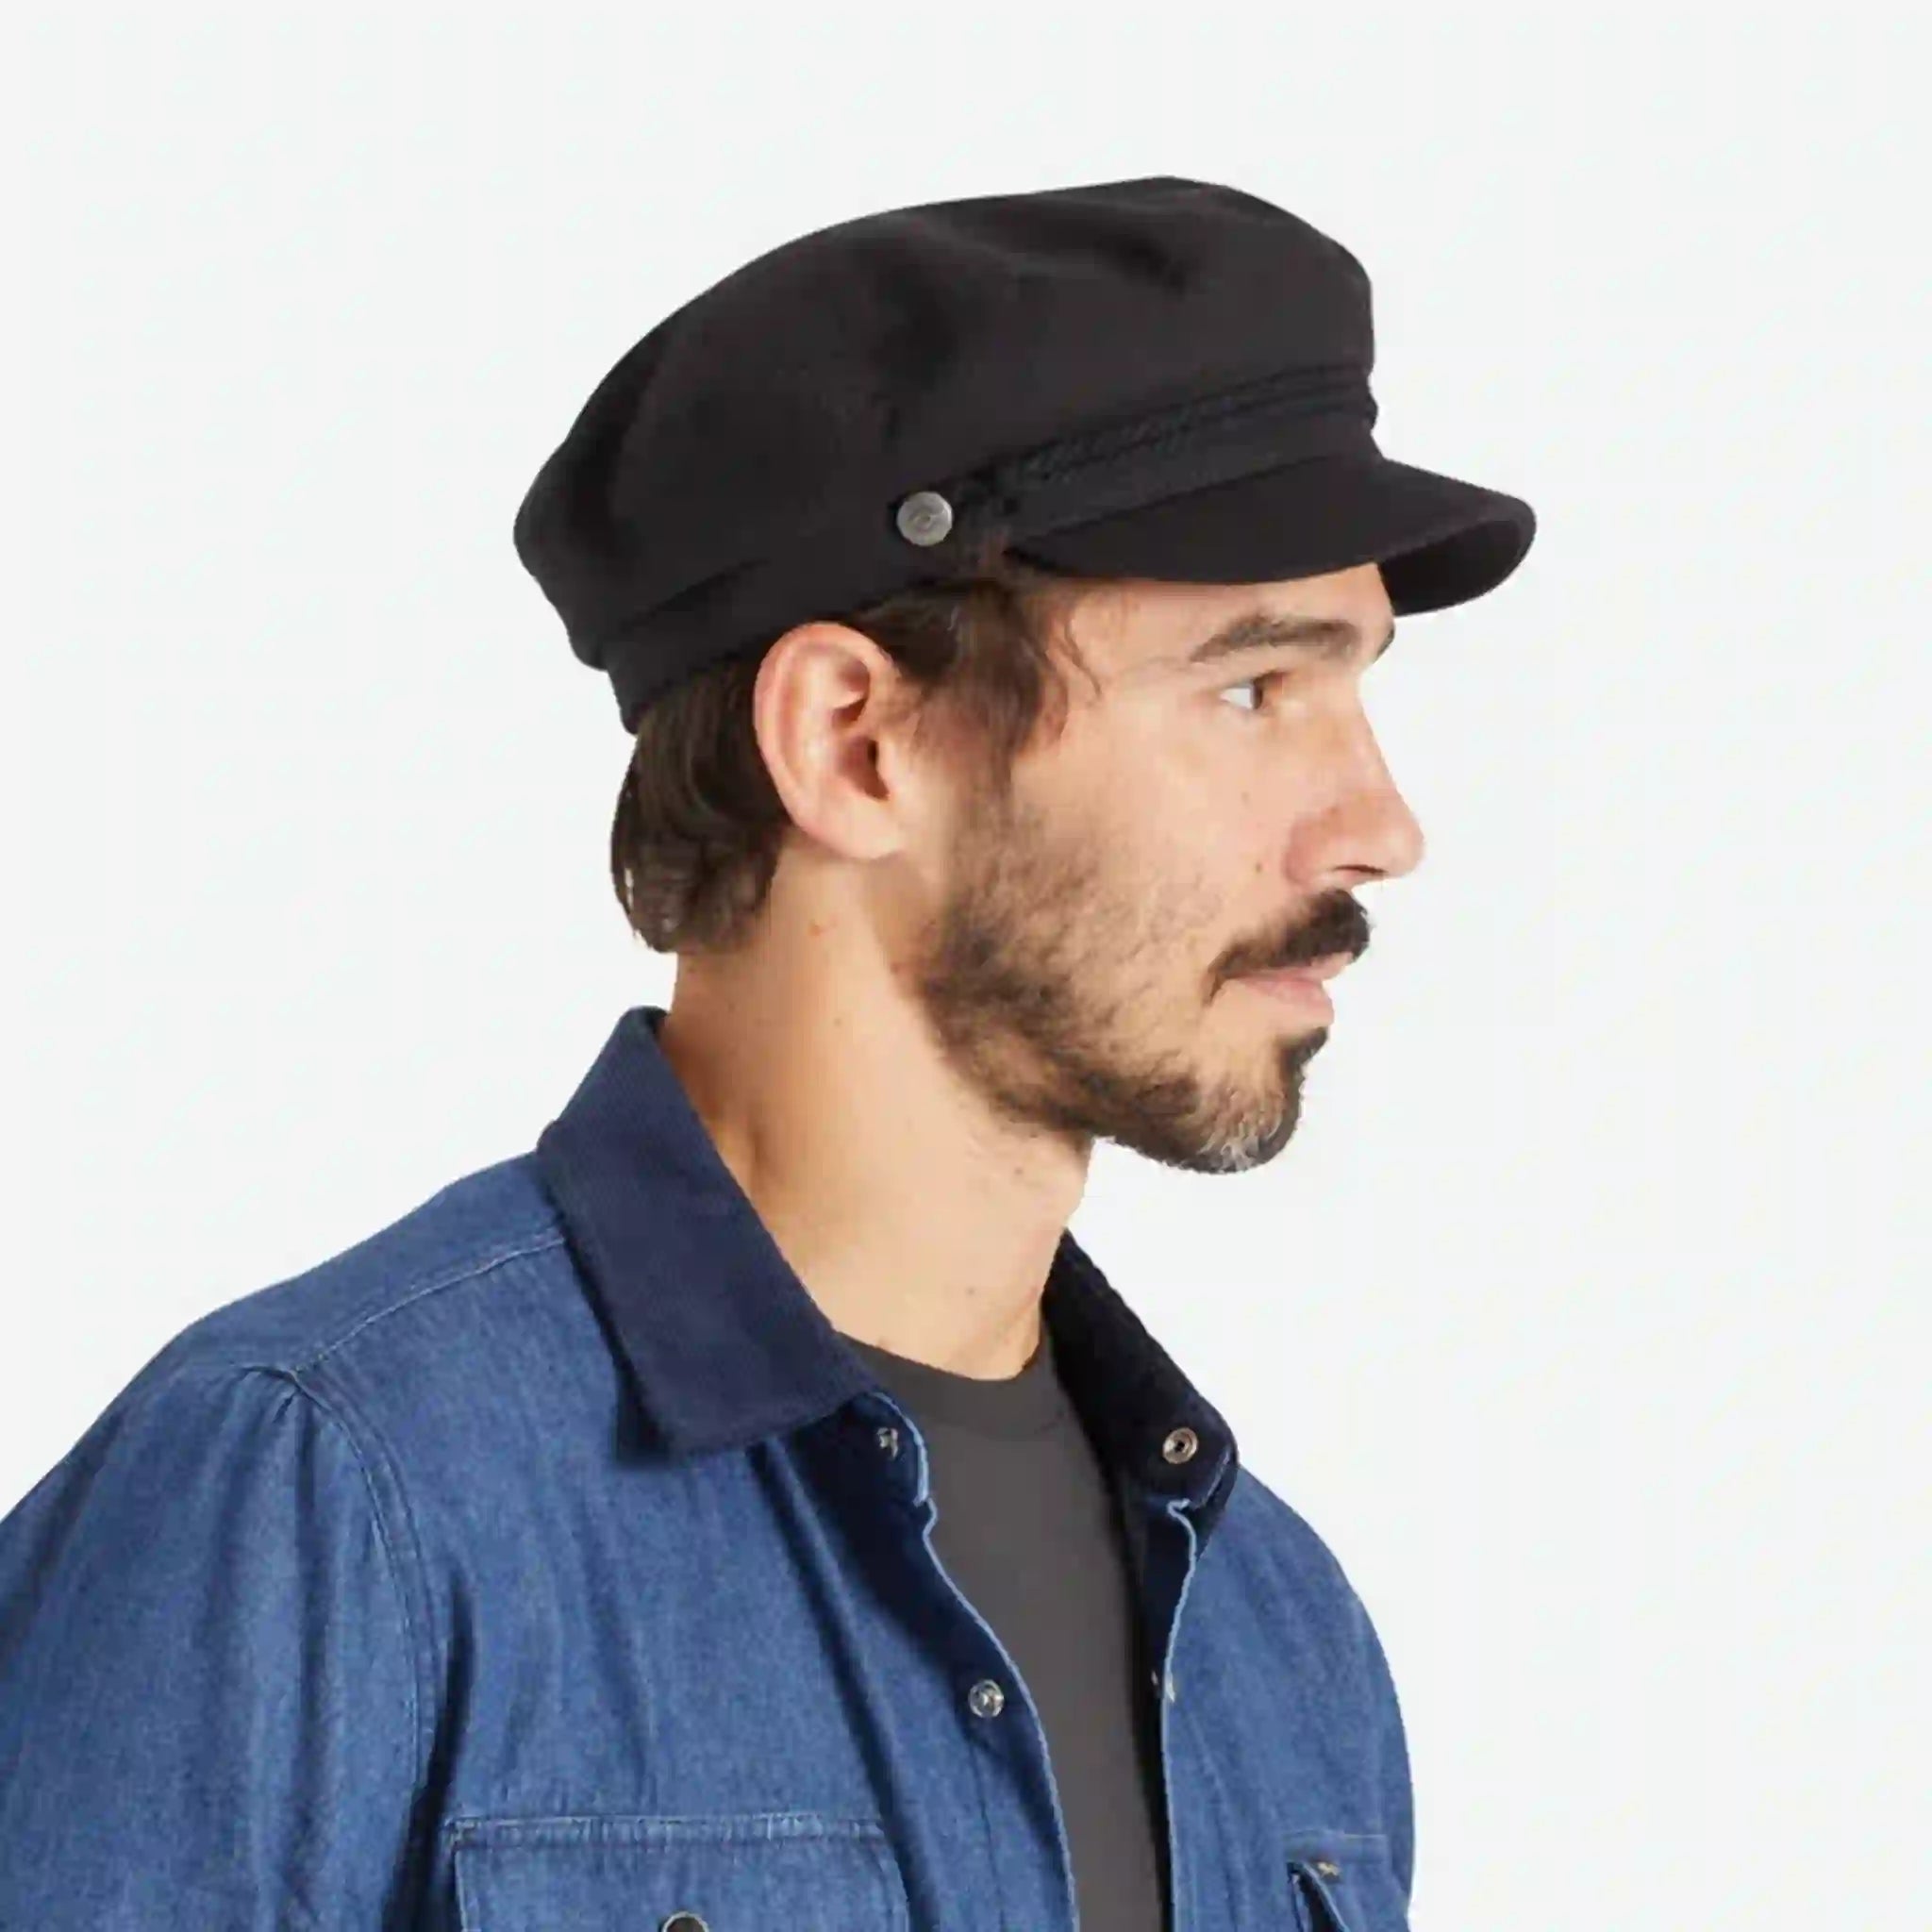 On a white background is a model wearing a black fiddler cap with a cord detail.